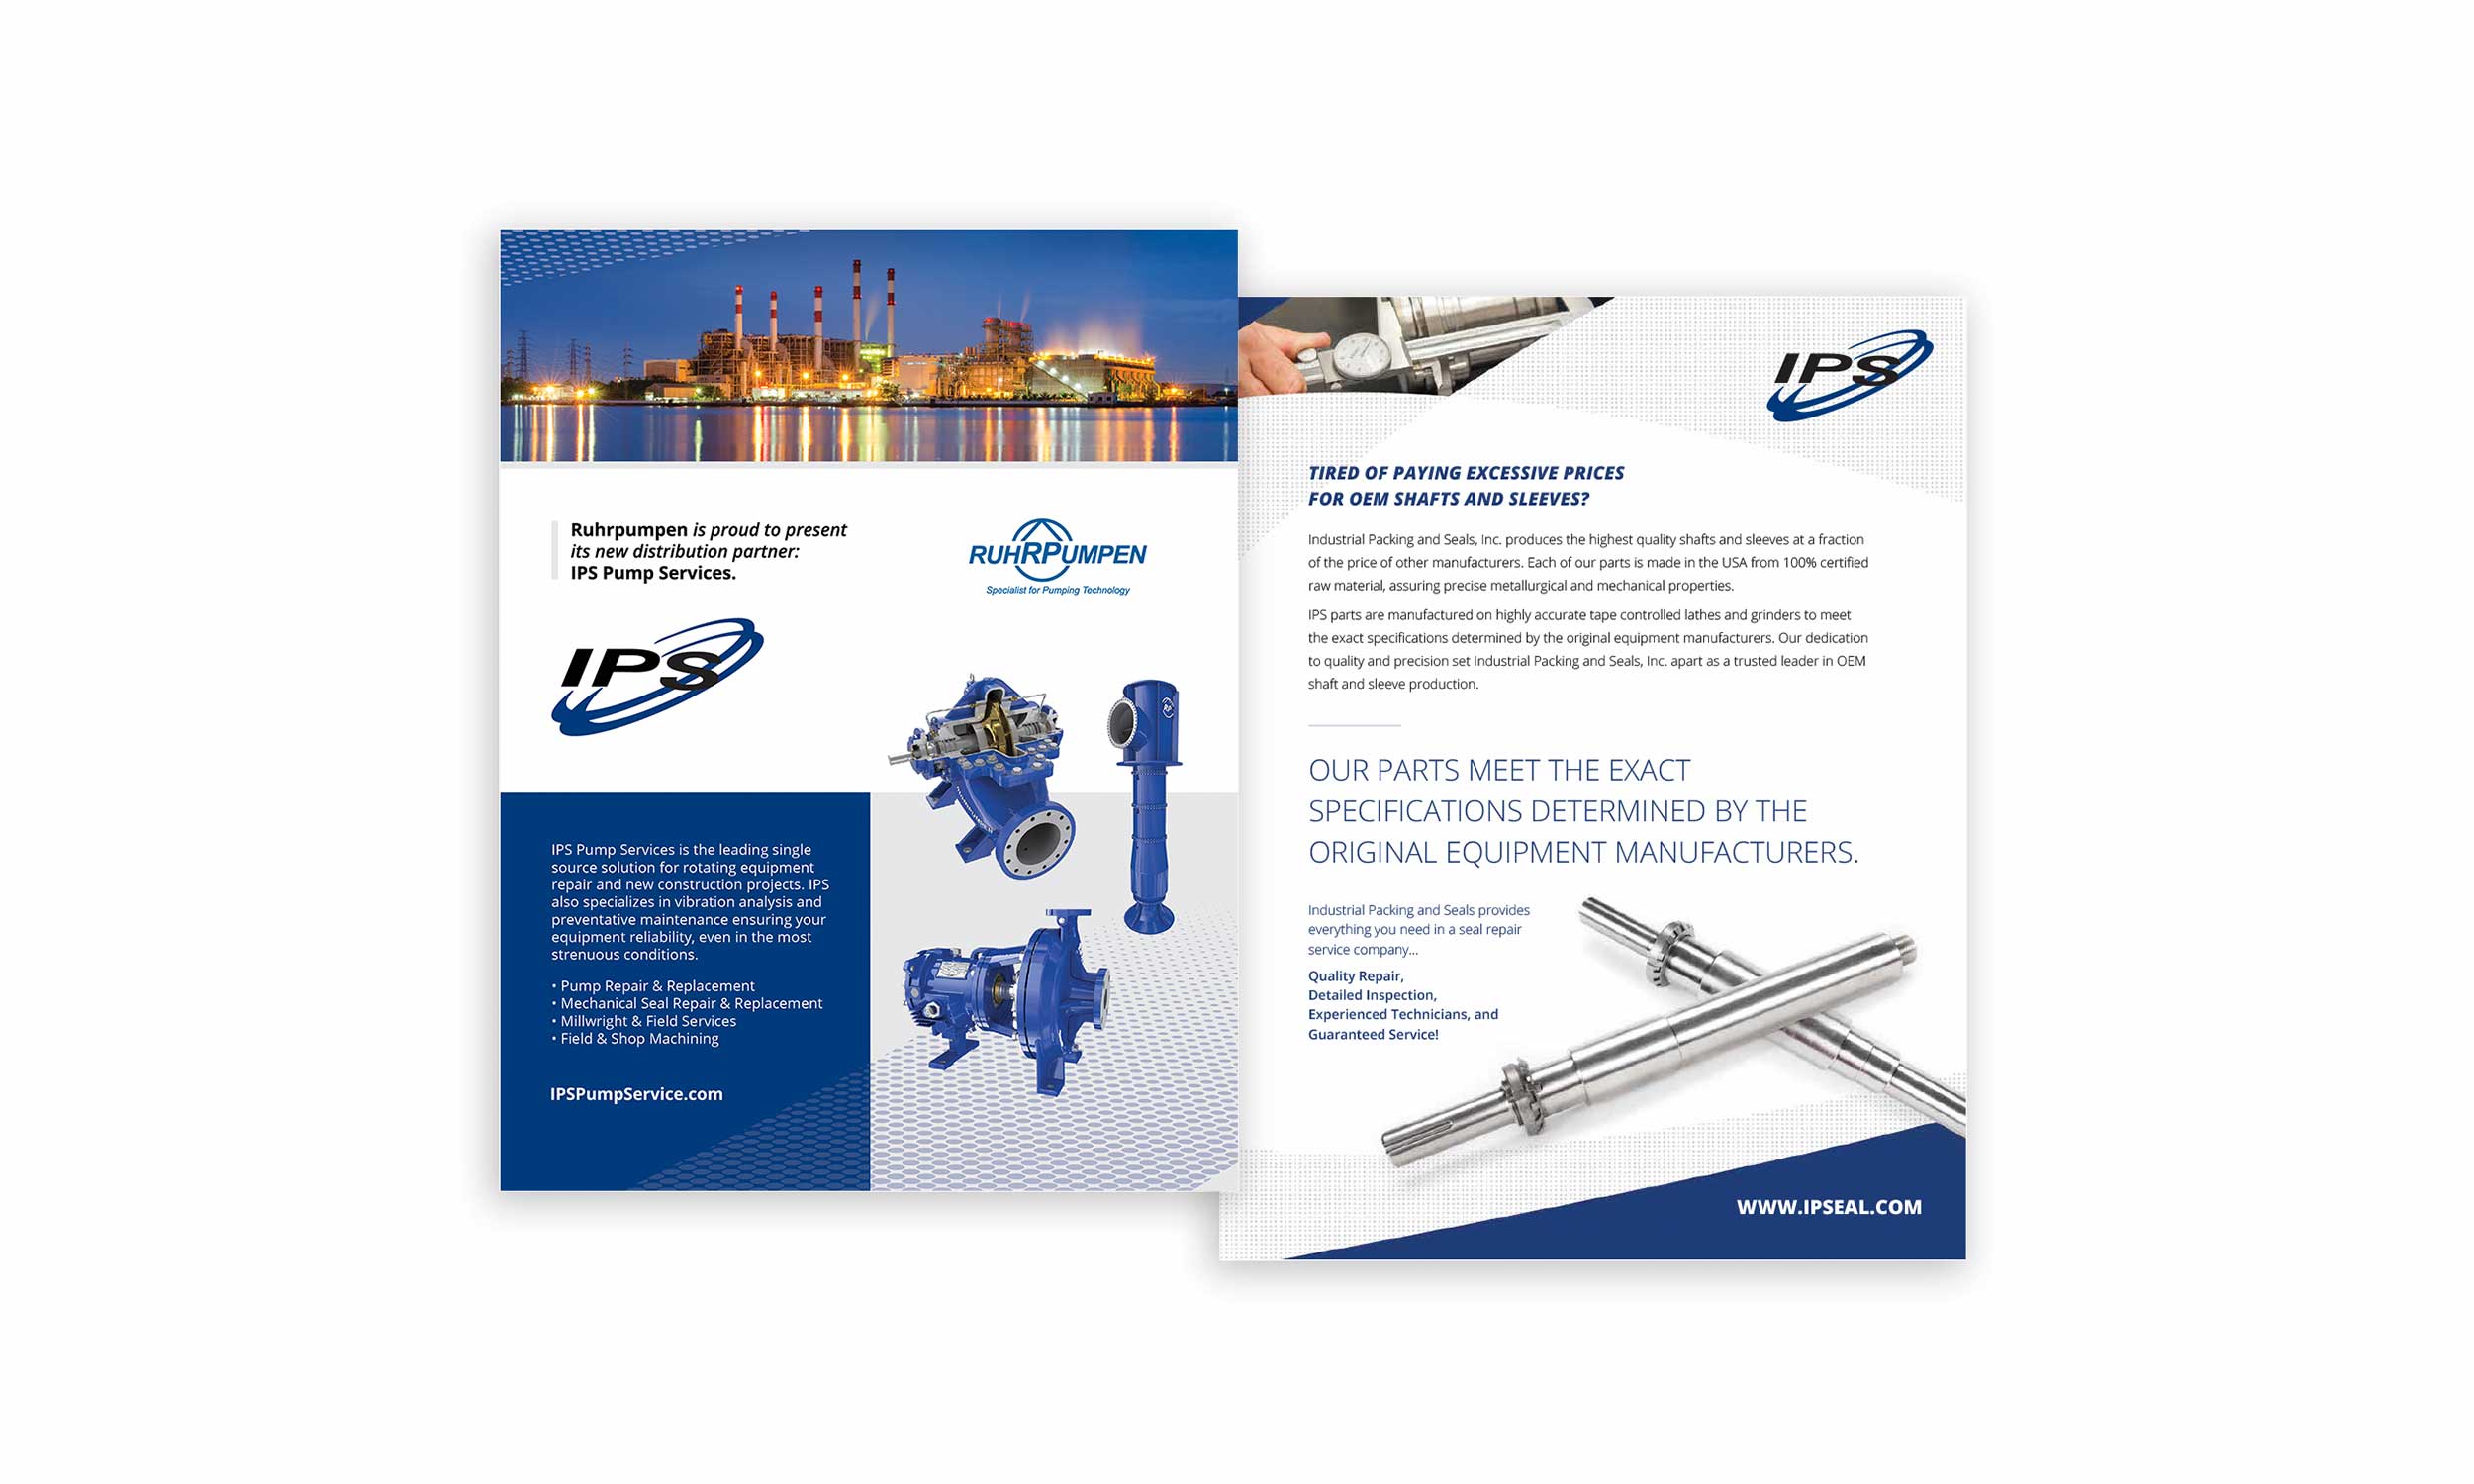 Industrial Packing and Seals design and printing of bi-fold brochure for sales and marketing.